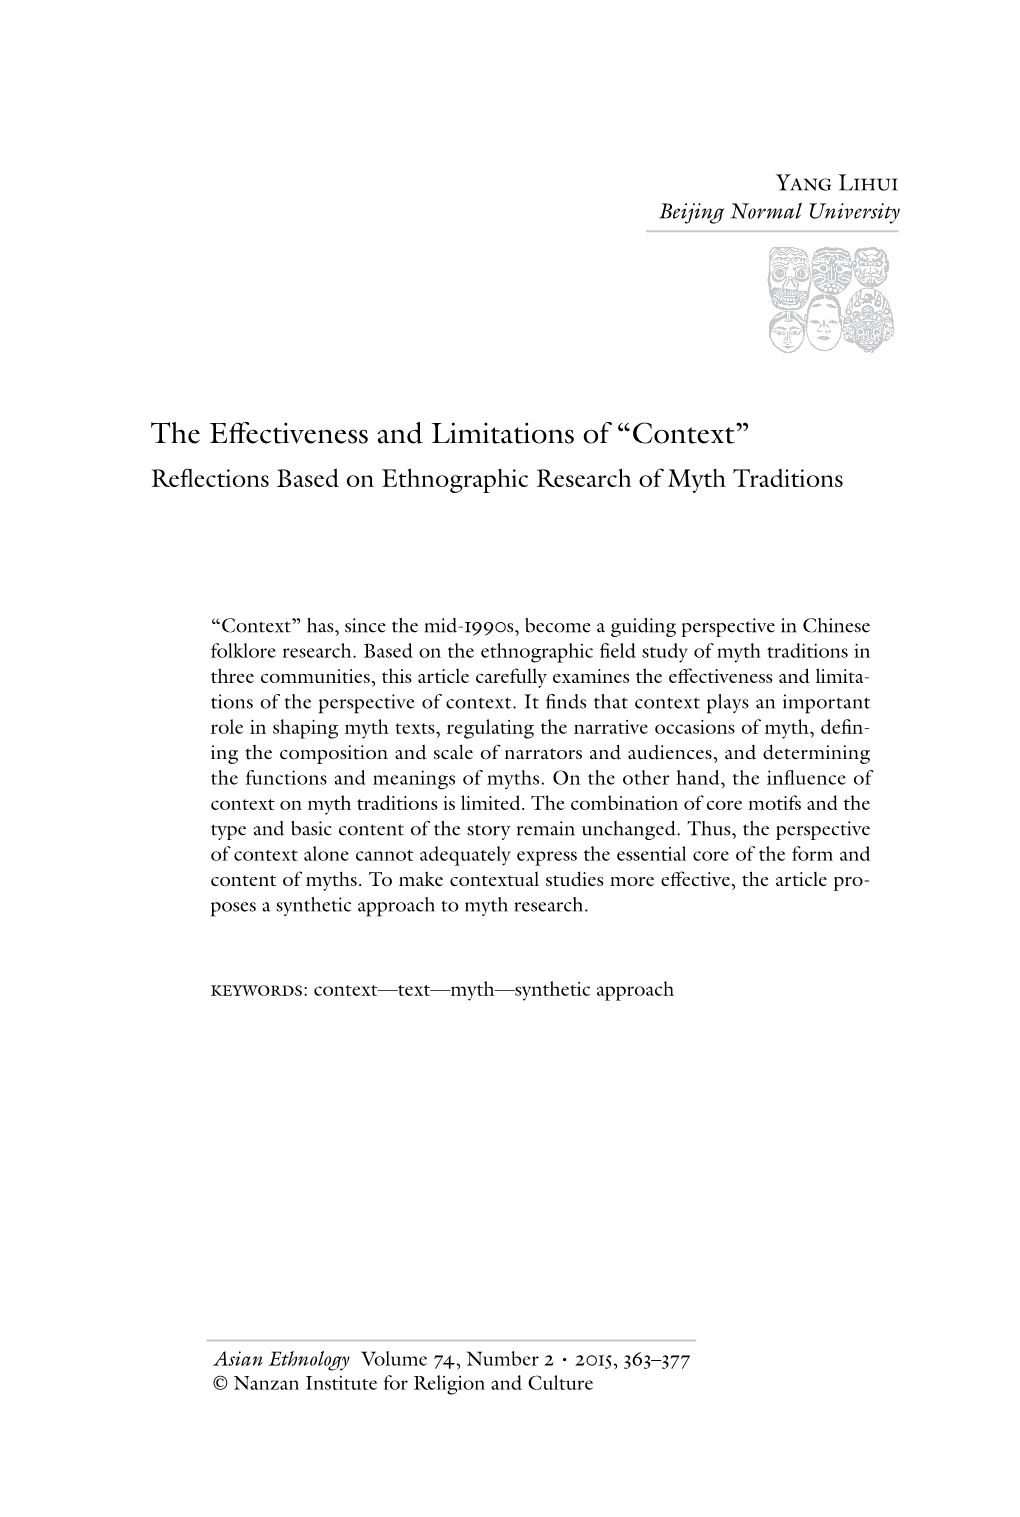 The Effectiveness and Limitations of “Context” Reflections Based on Ethnographic Research of Myth Traditions